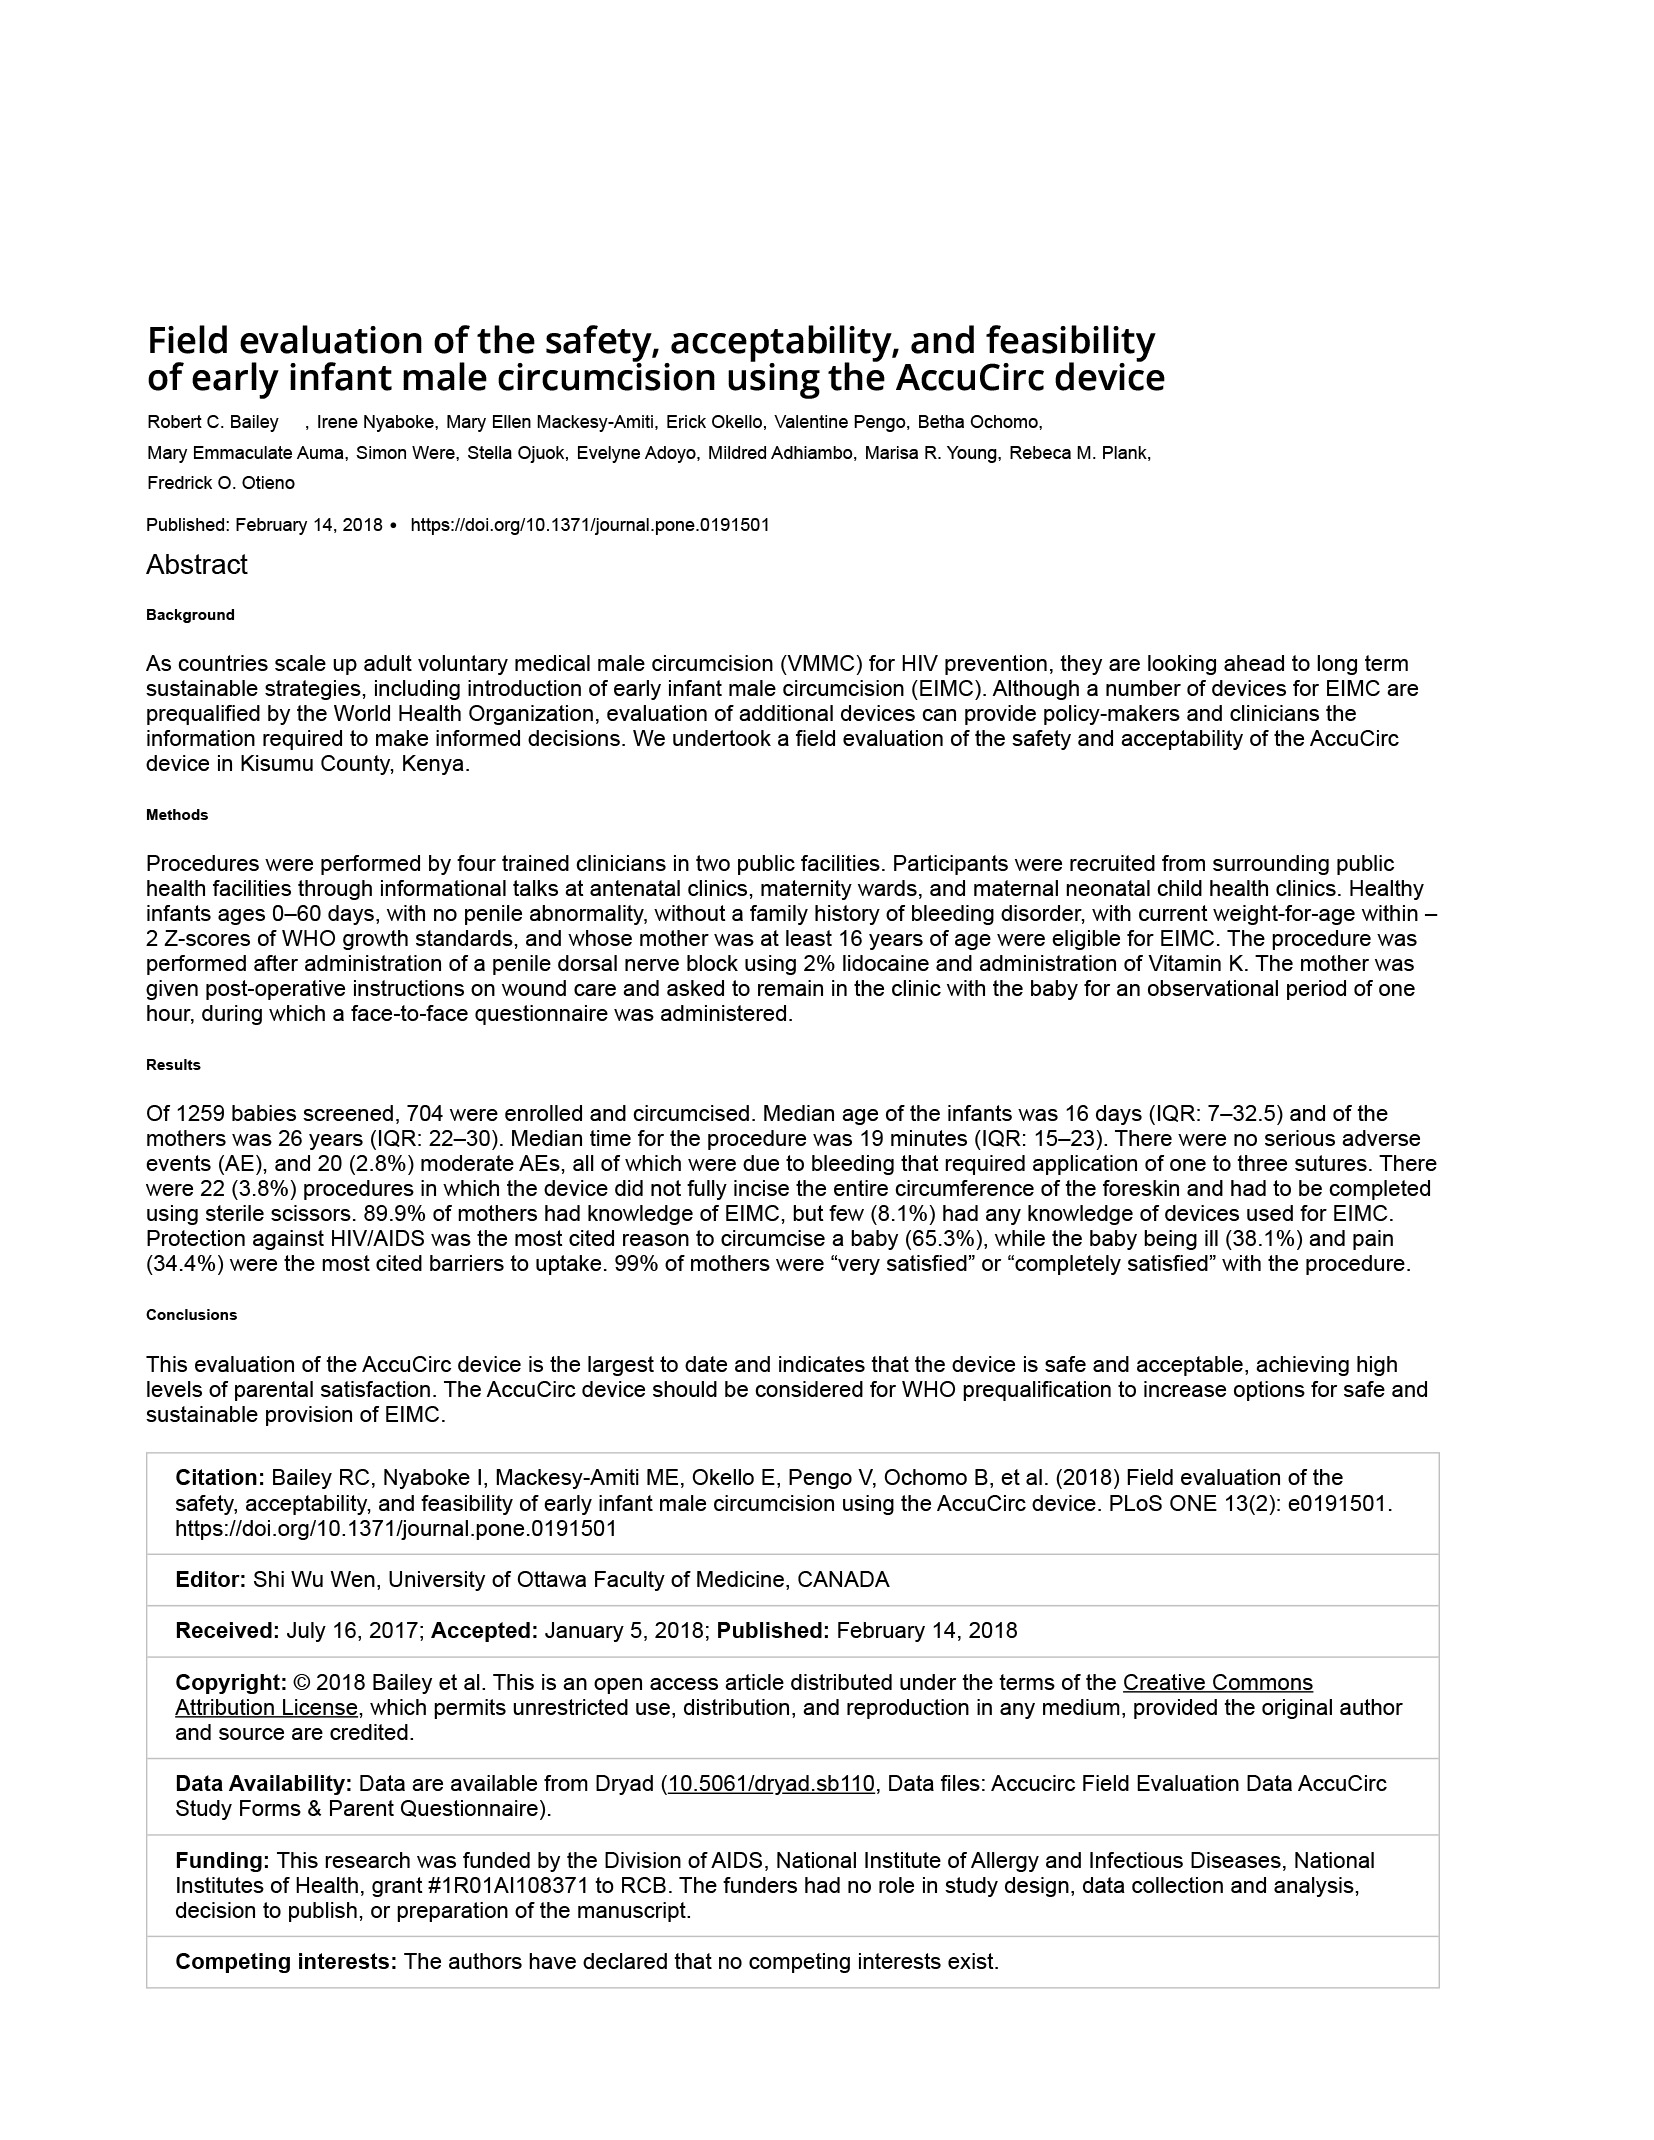 Field Evaluation of the Safety, Acceptability, and Feasibility of Early Infant Male Circumcision Using the AccuCirc Device - cover